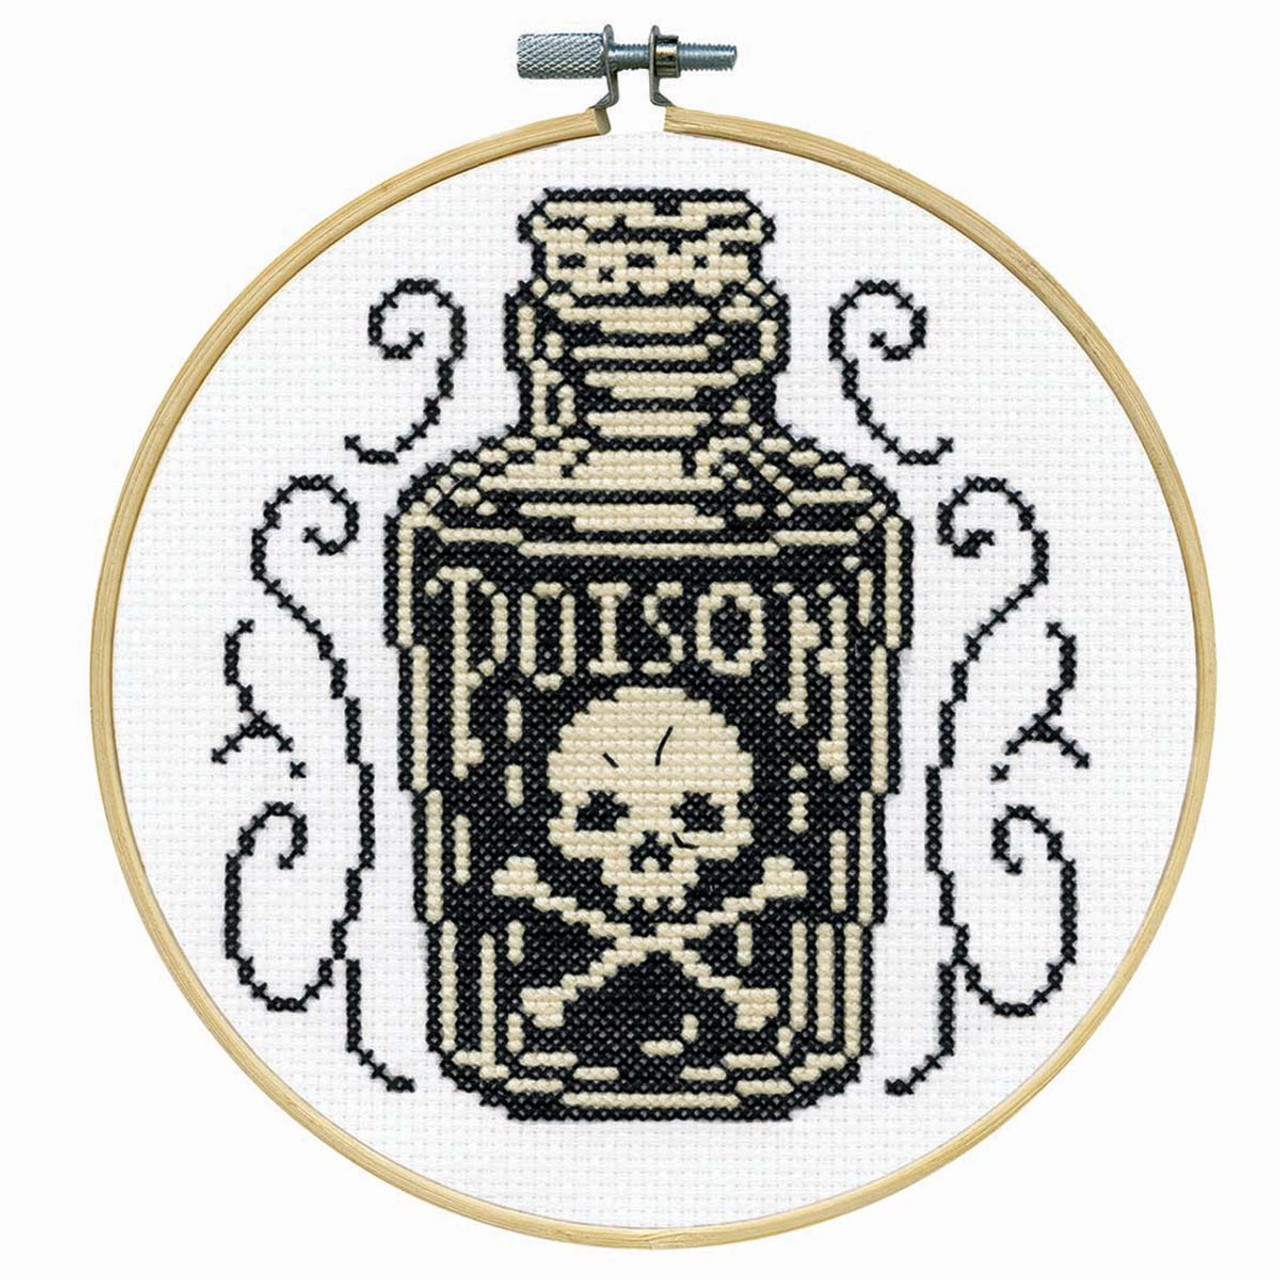 Free Pencils Cross stitch pattern for plastic or wooden canvas - online PDF  download at